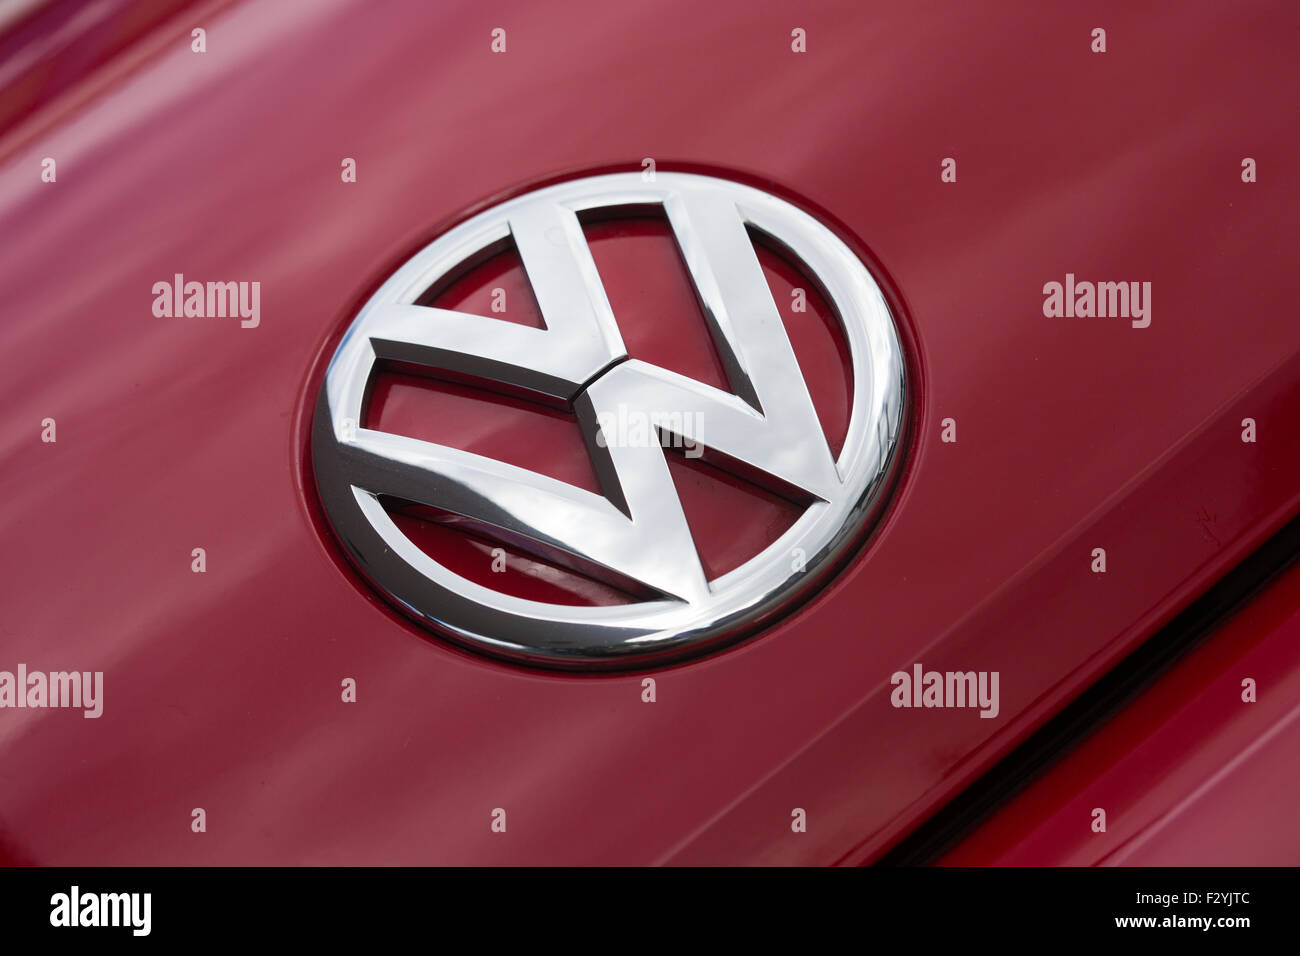 Volkswagen logo on front of car Stock Photo